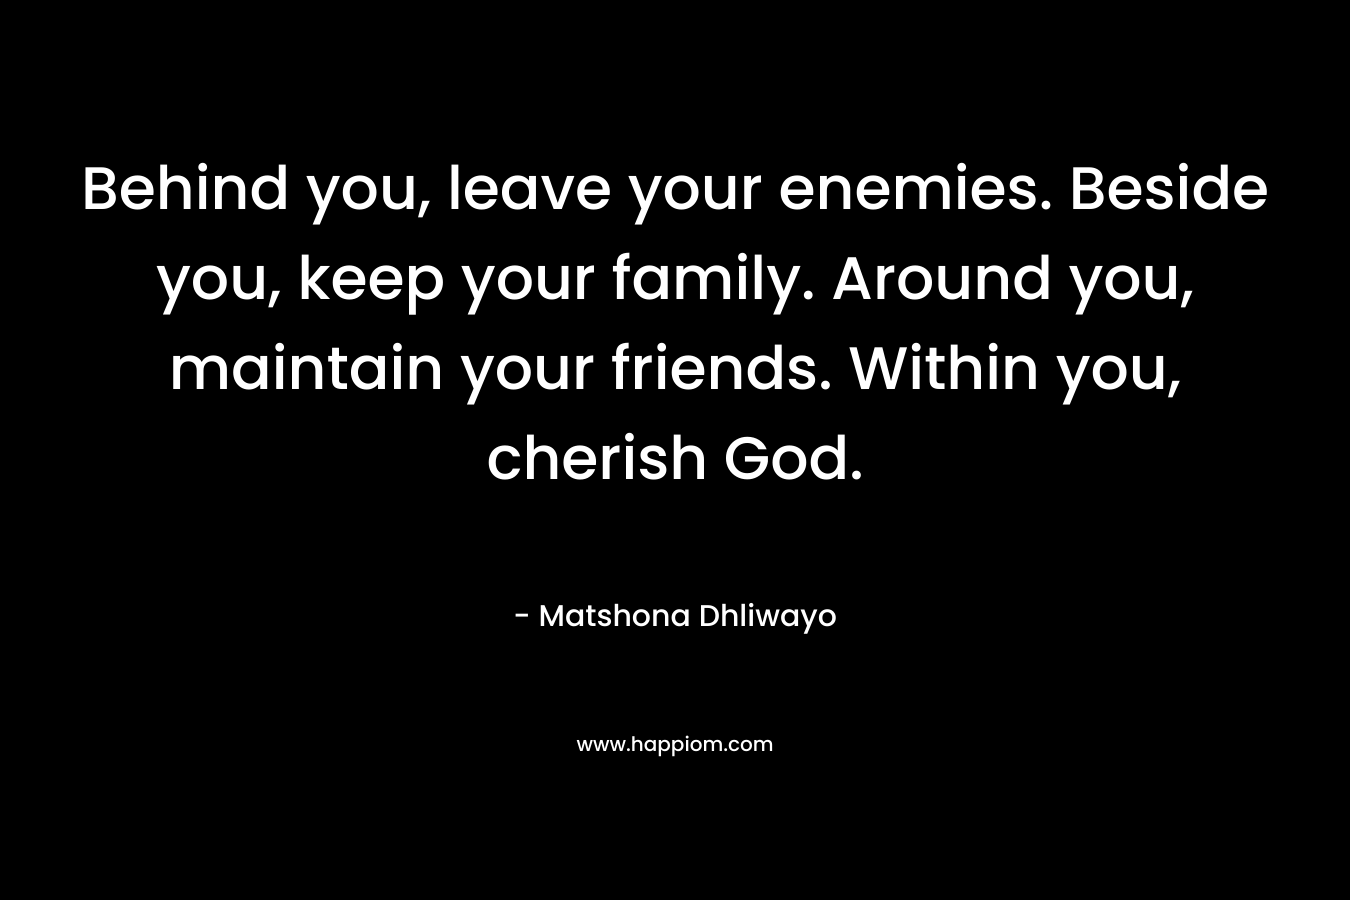 Behind you, leave your enemies. Beside you, keep your family. Around you, maintain your friends. Within you, cherish God.